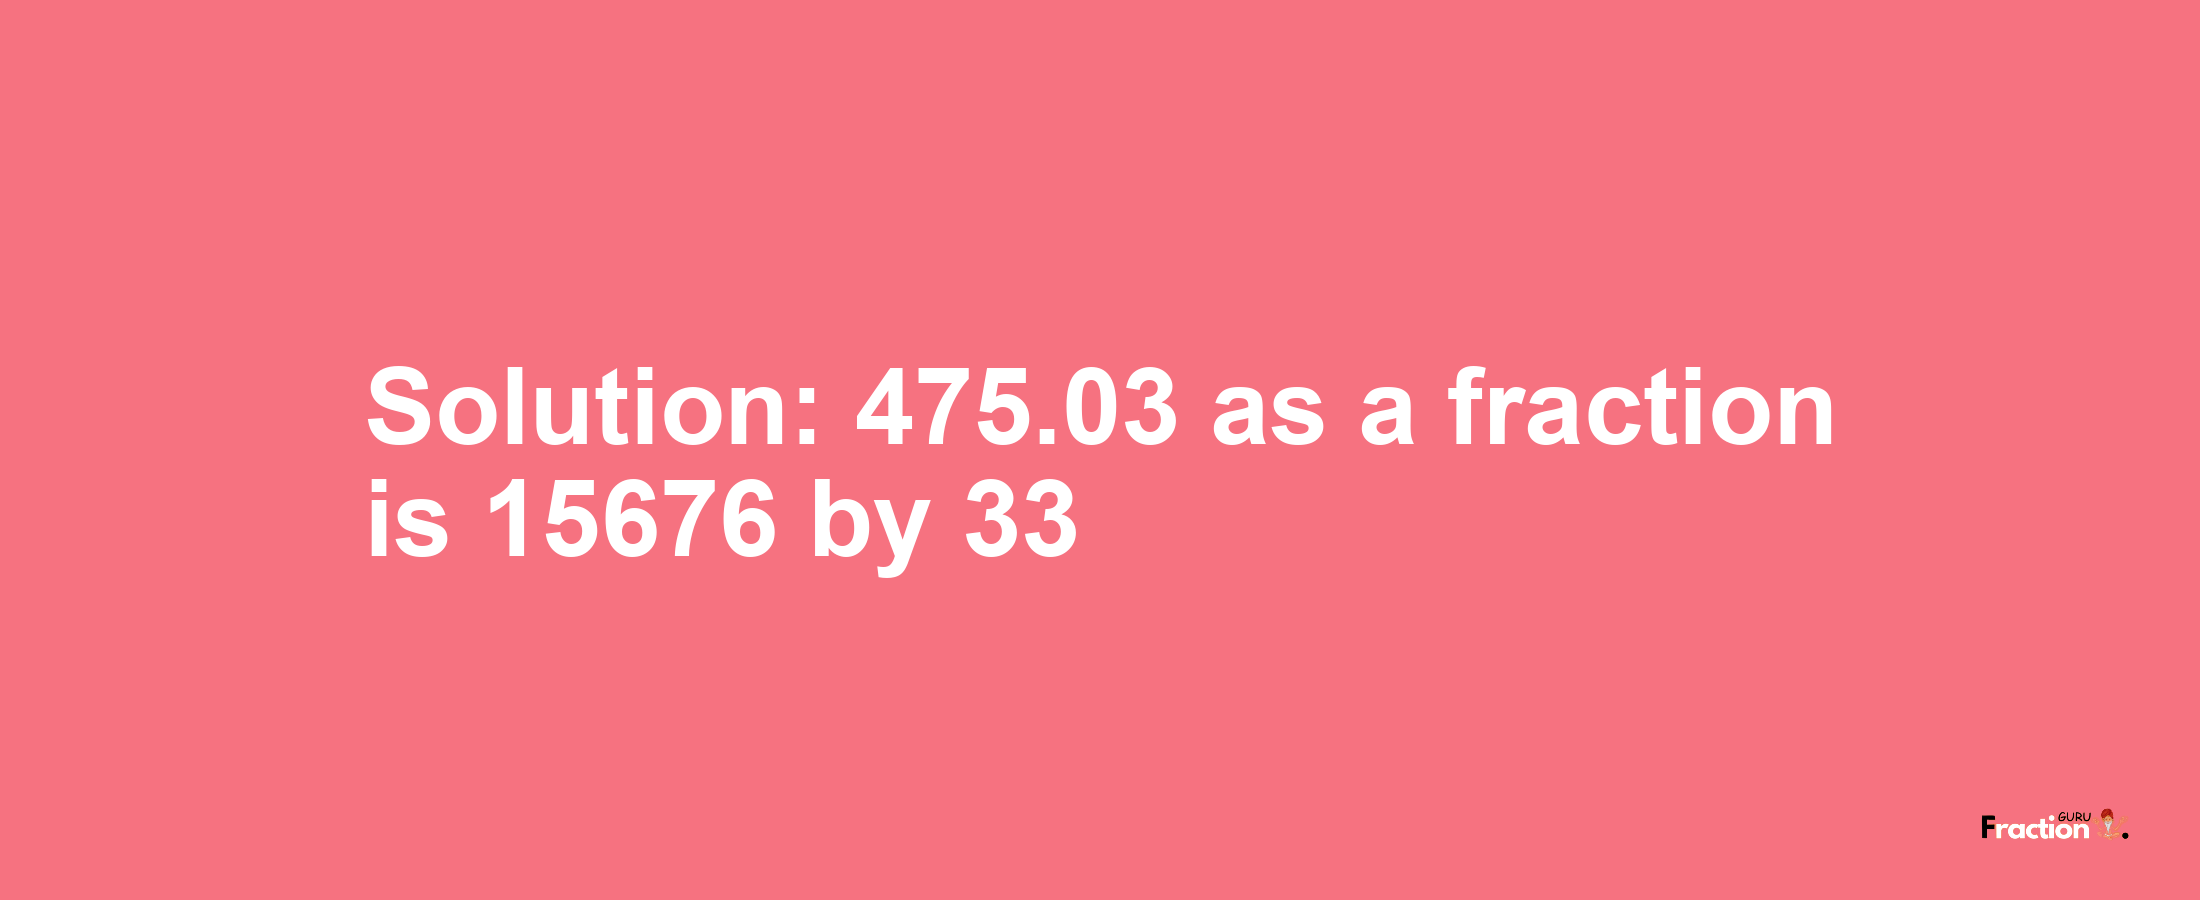 Solution:475.03 as a fraction is 15676/33